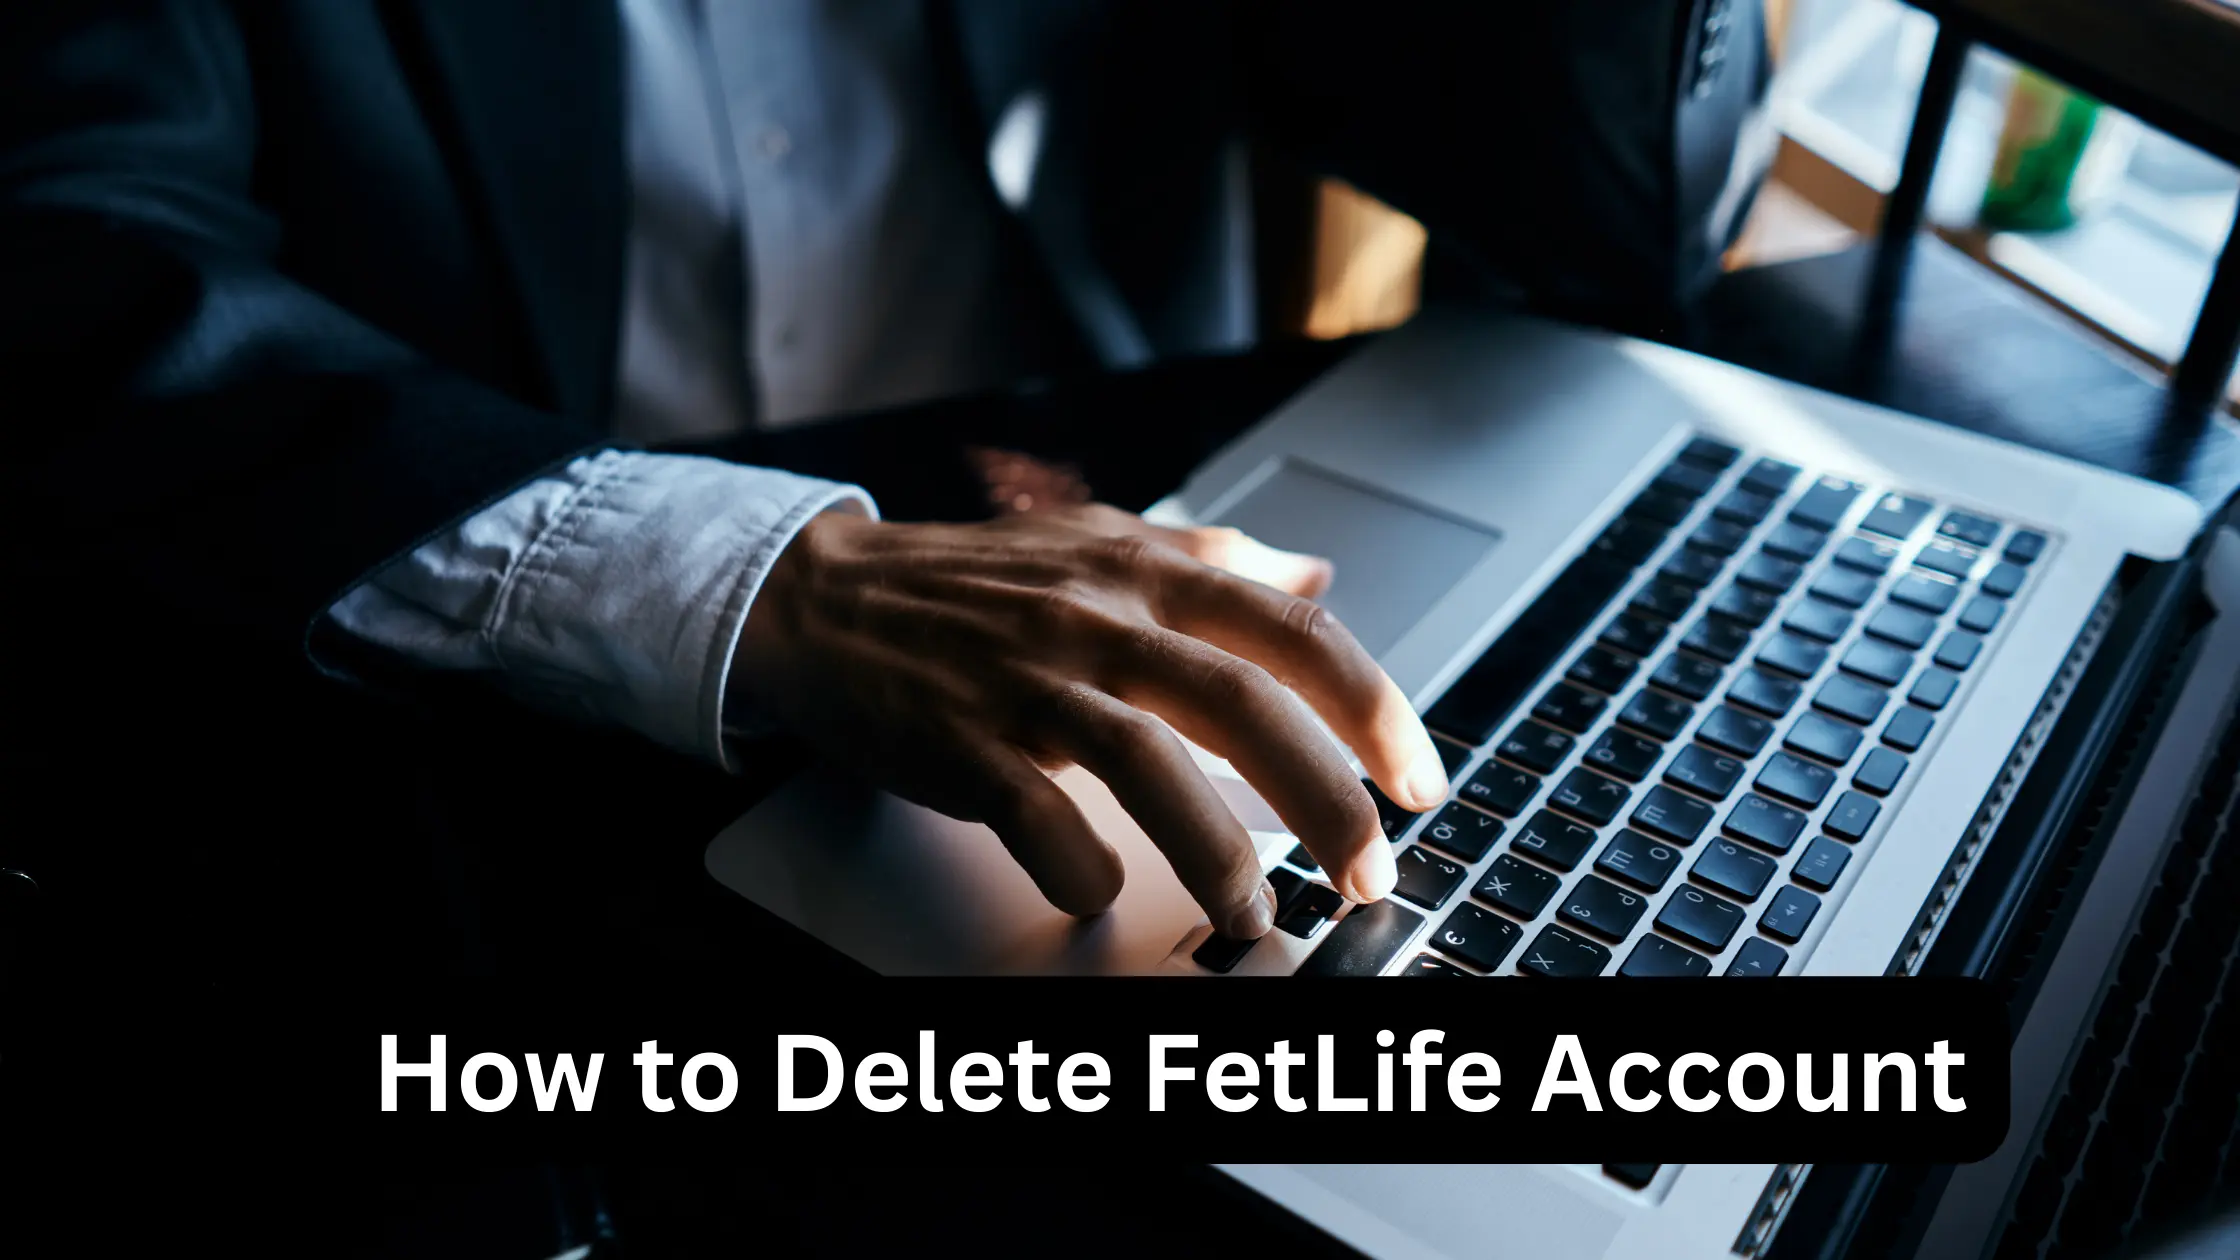 daniel grimmett recommends how do i delete my fetlife account pic